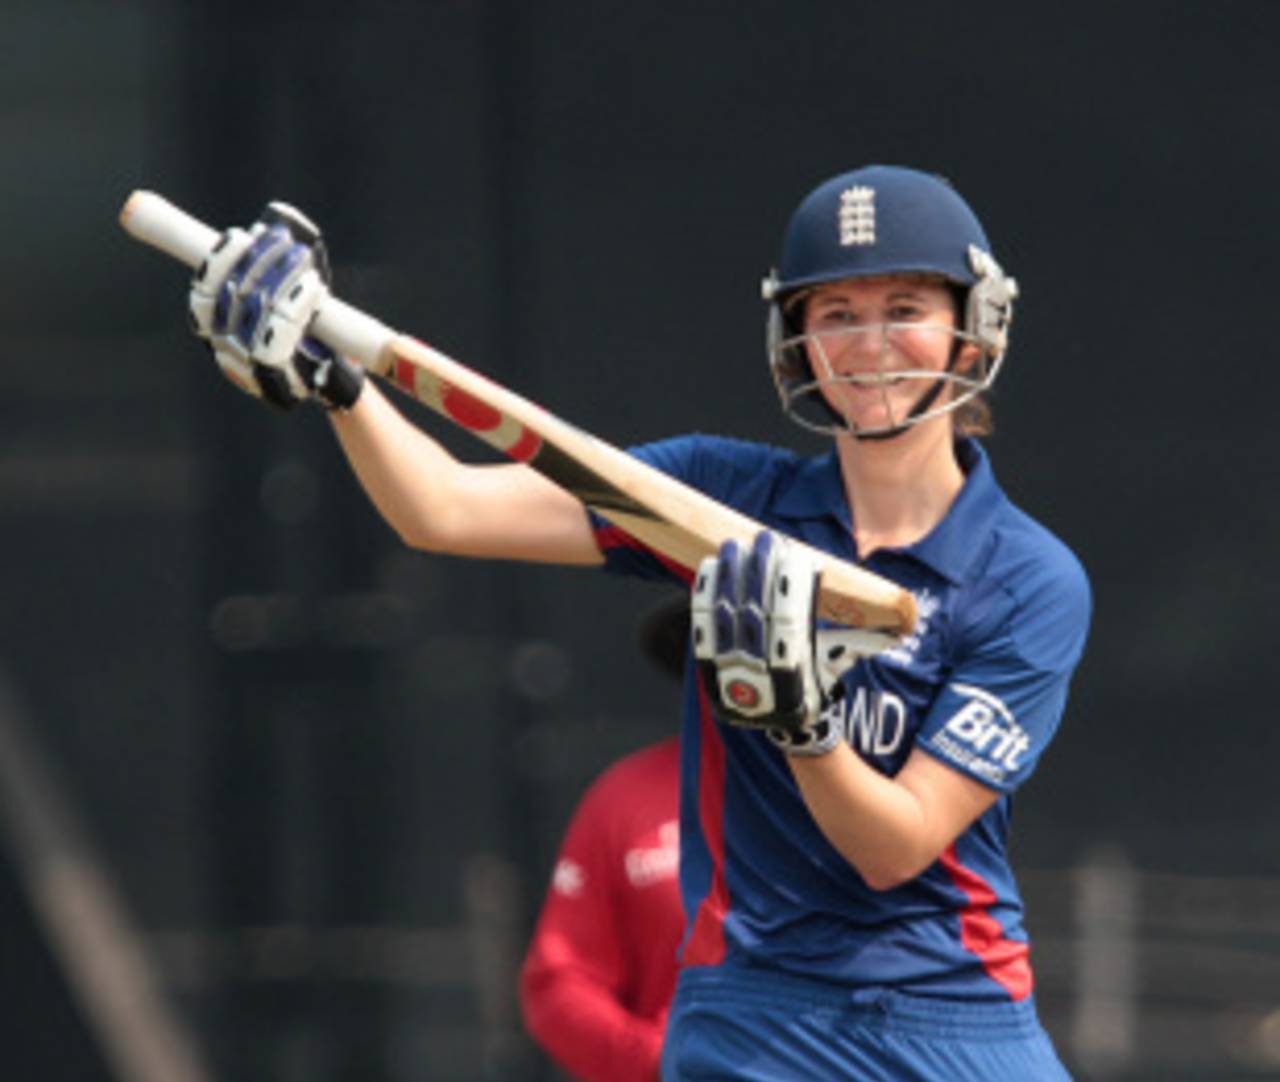 This could be Charlotte Edwards' last chance at another World Cup triumph&nbsp;&nbsp;&bull;&nbsp;&nbsp;ICC/Solaris Images